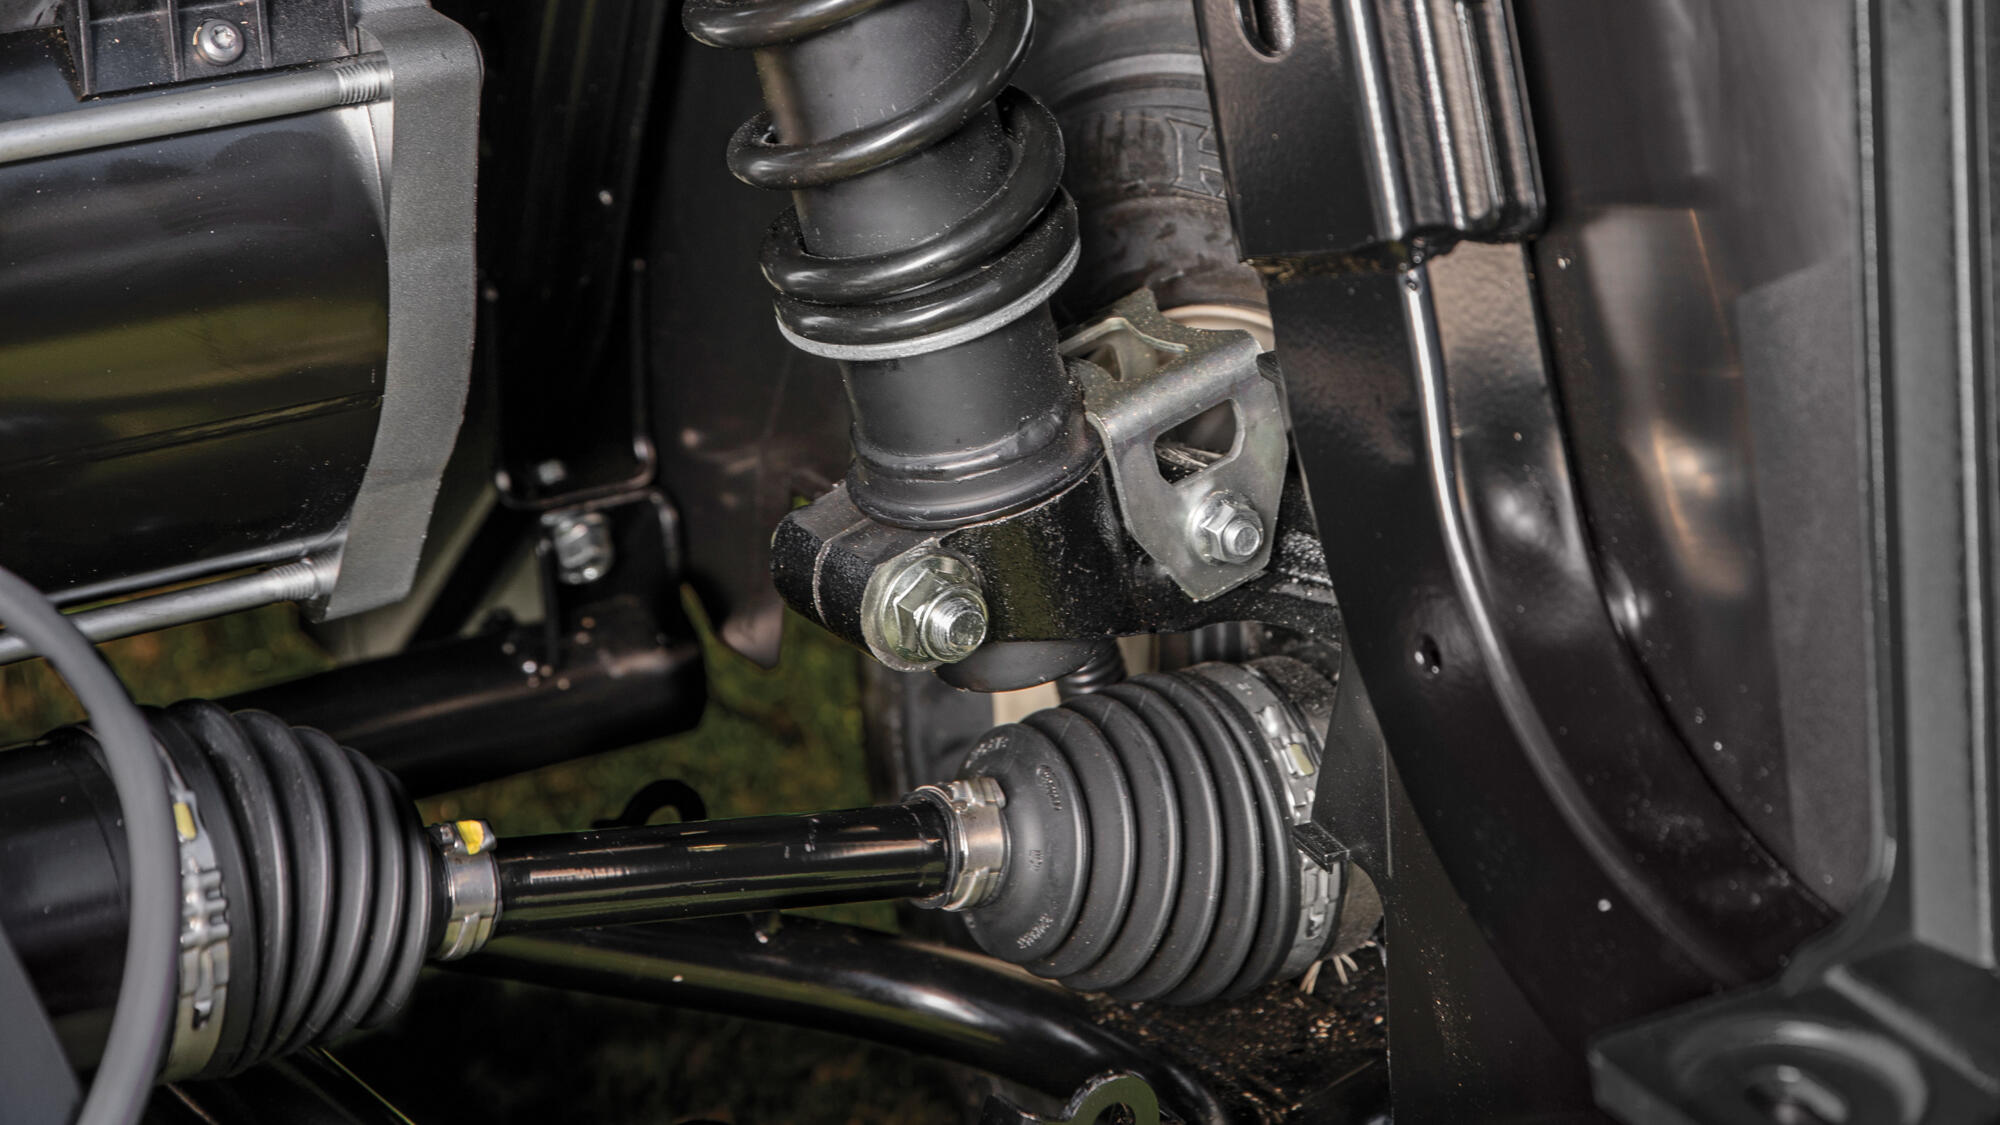 IRS - Independent Rear Suspension